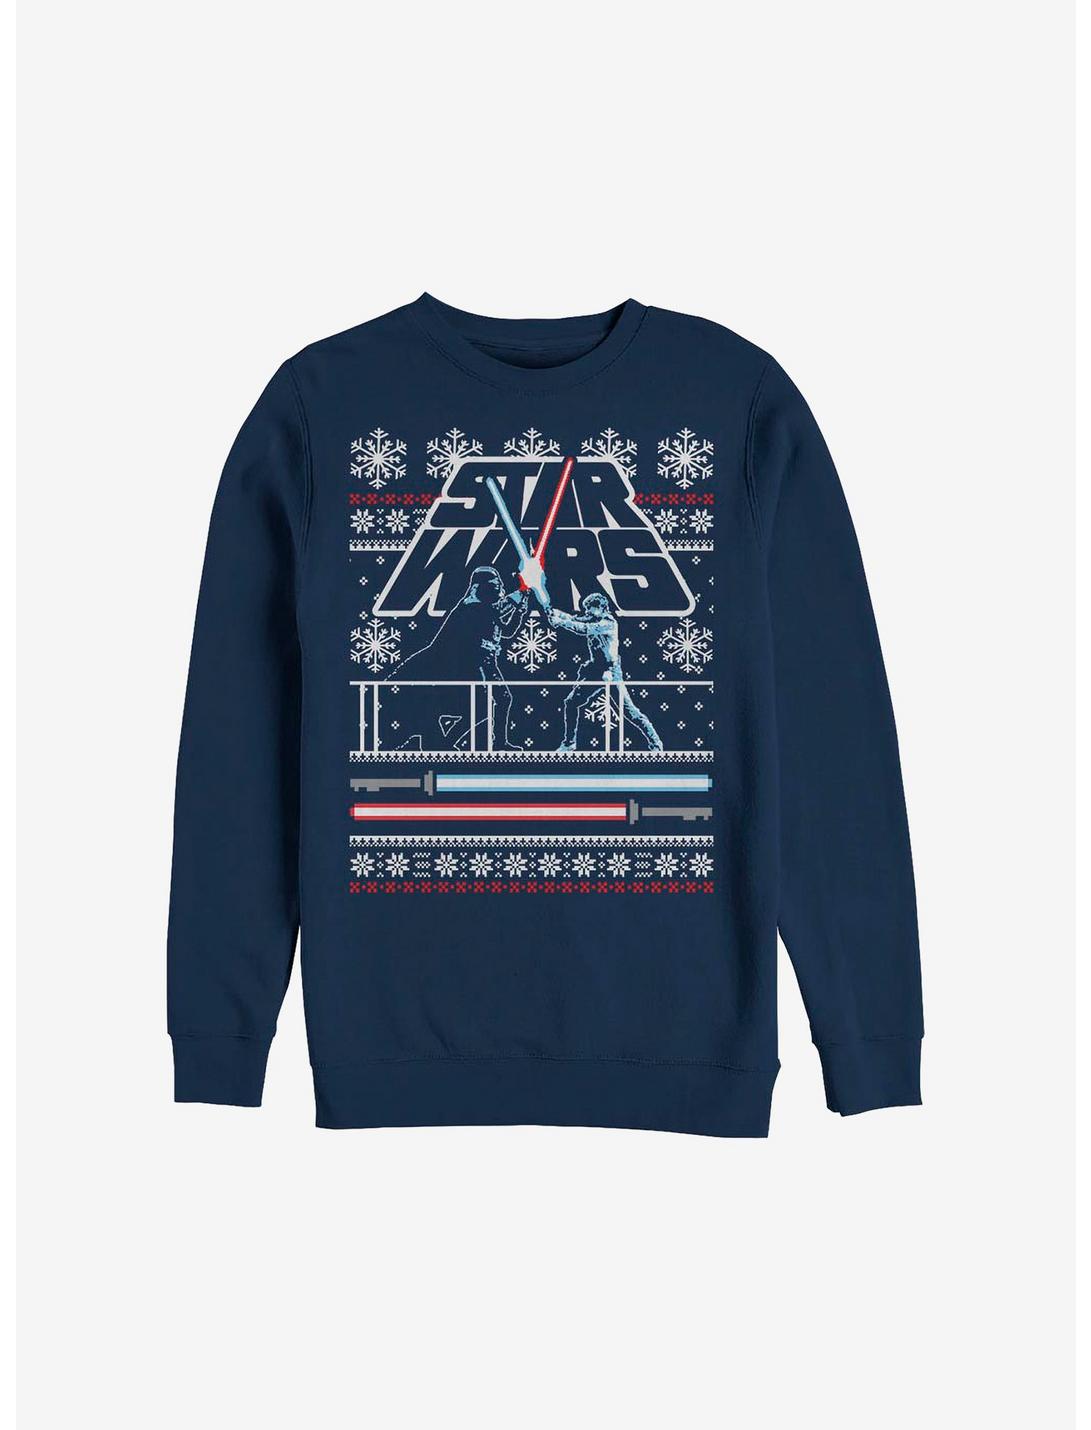 Star Wars Holiday Face Off Ugly Christmas Sweater  Sweatshirt, NAVY, hi-res